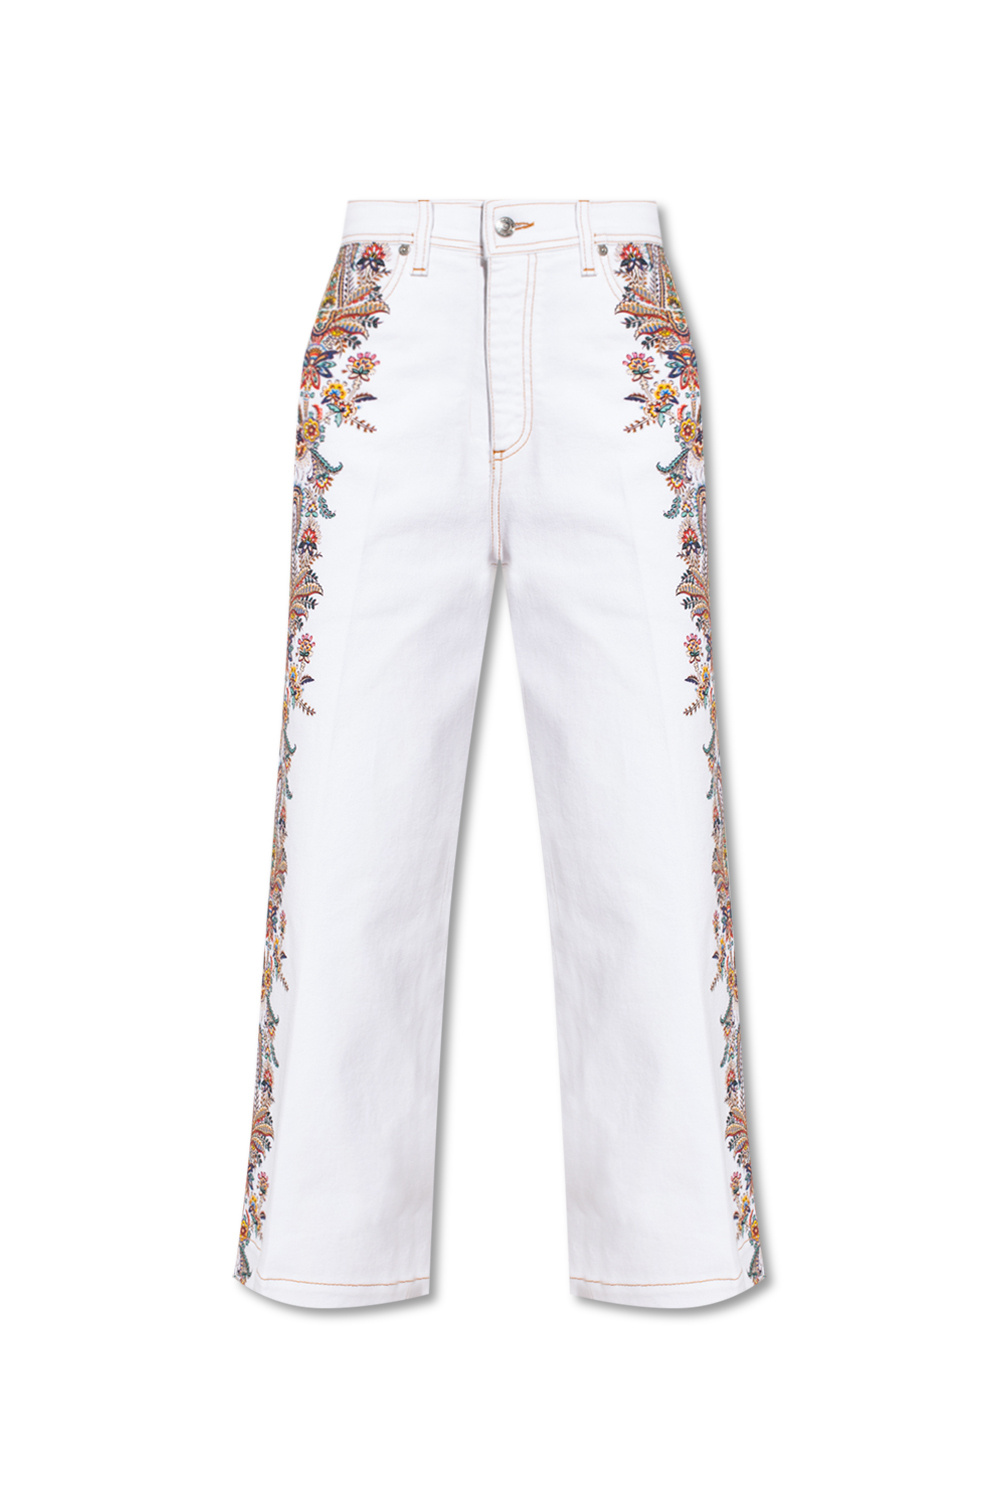 Etro Jeans with paisley pattern